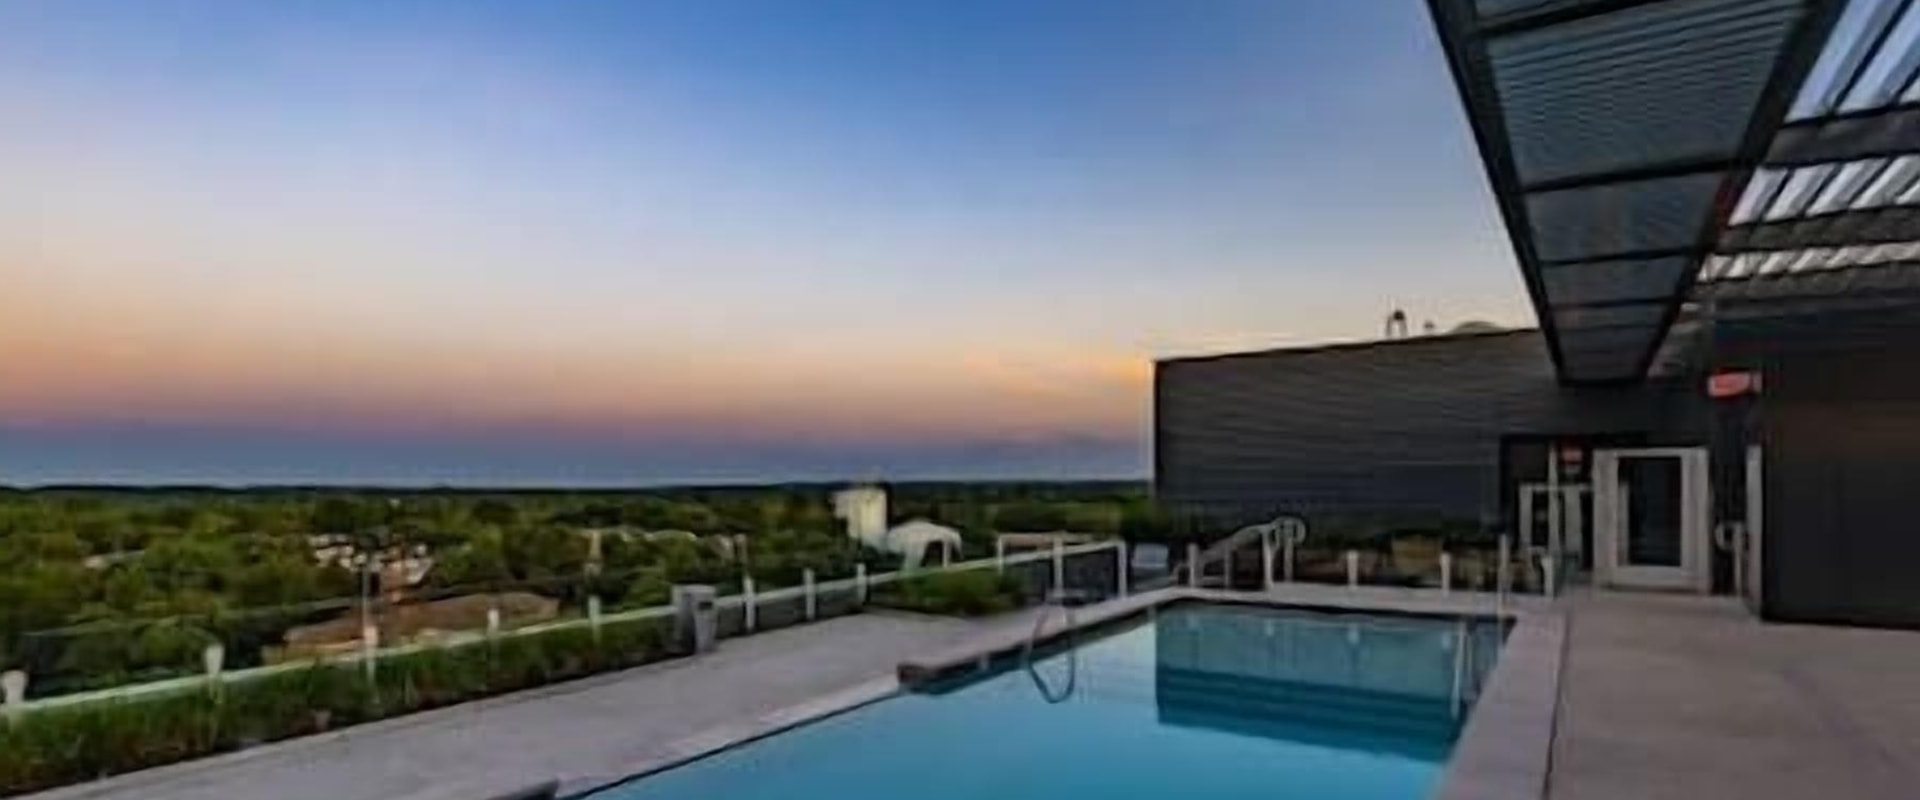 The Ultimate Guide to Vacation Rentals with Private Pools in McLean, VA